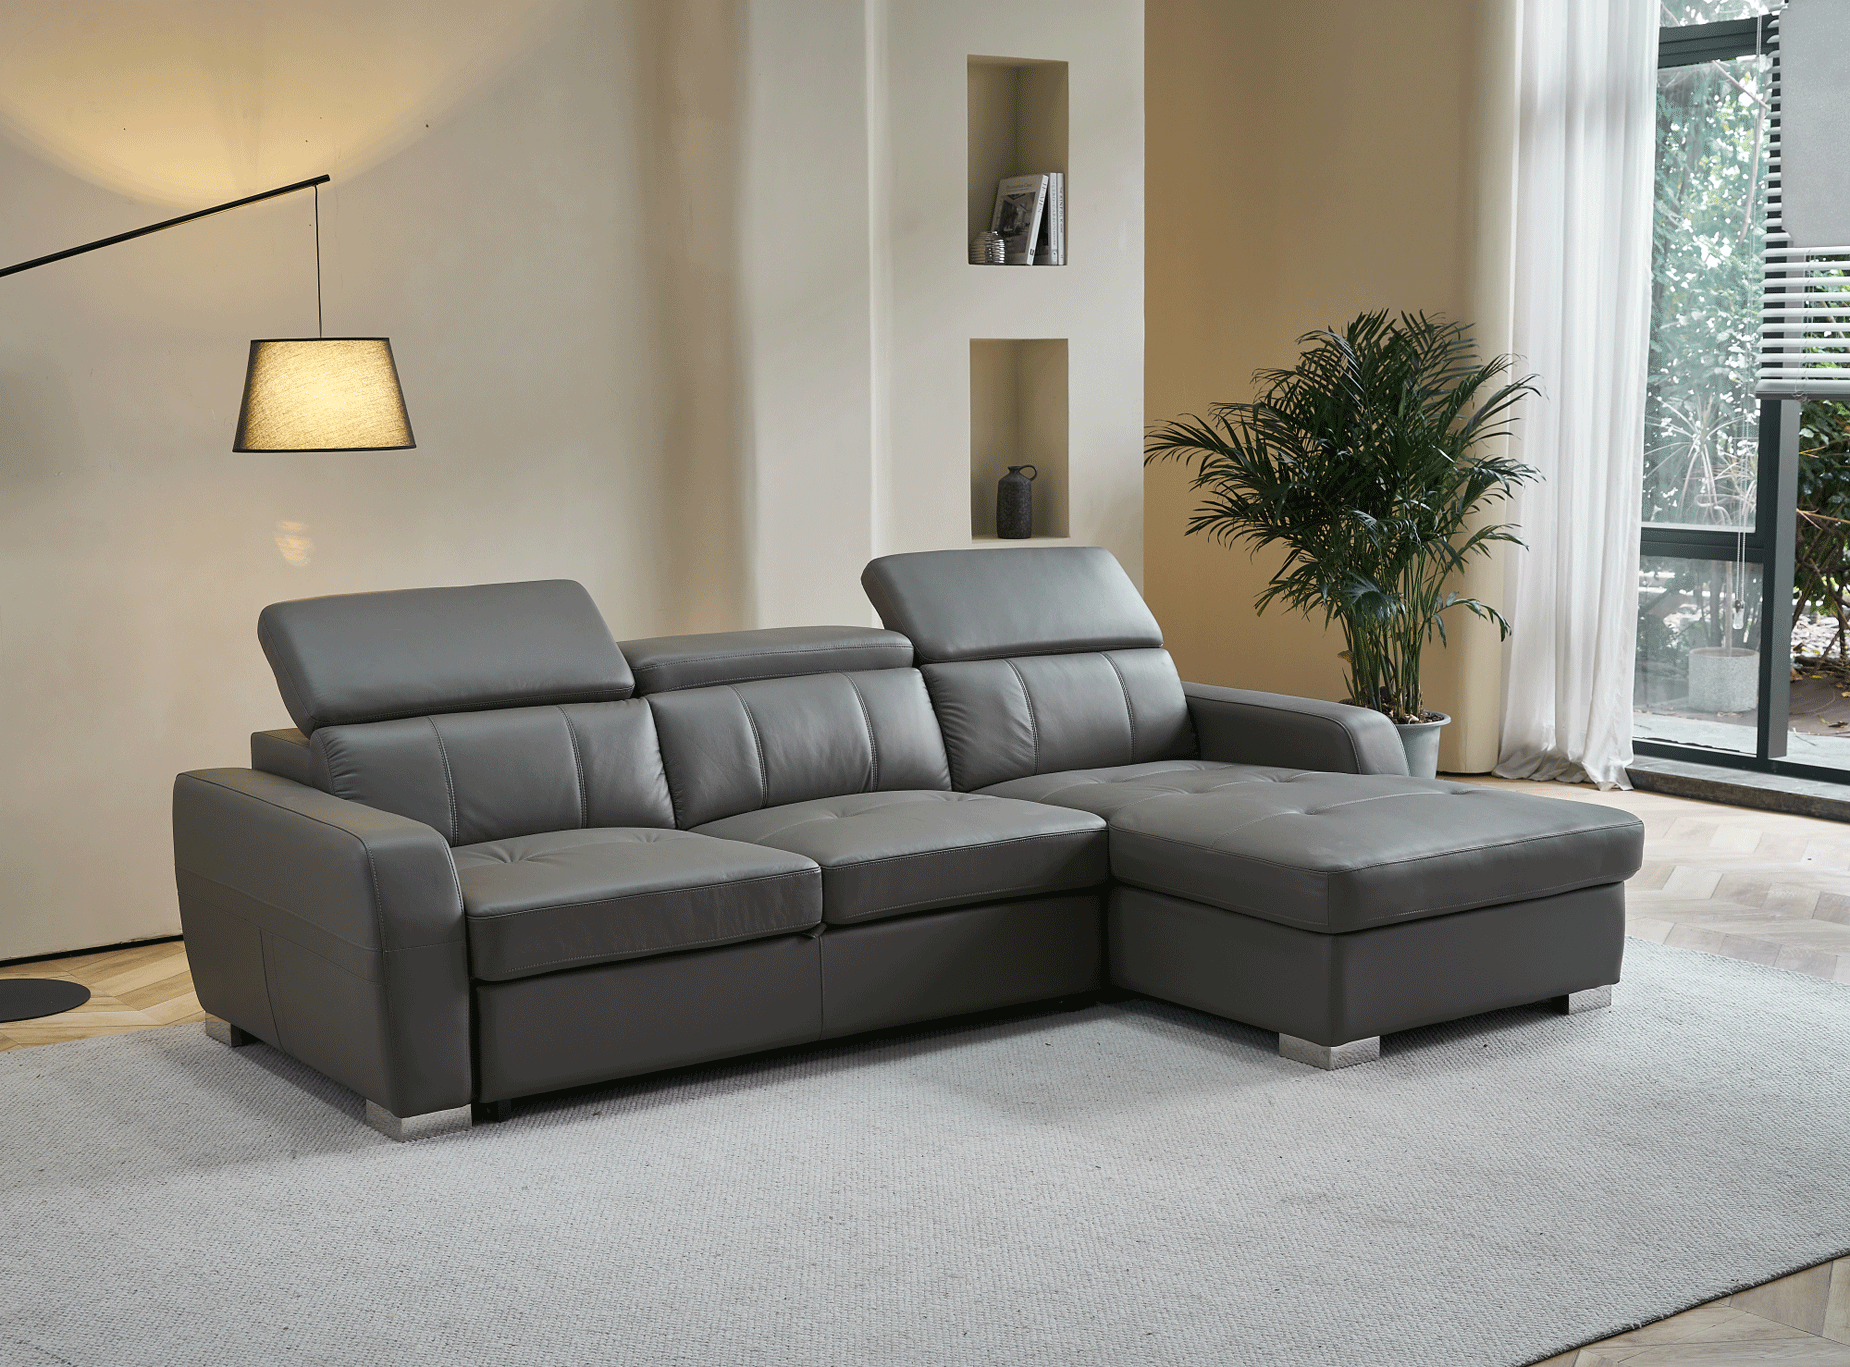 Living Room Furniture Sleepers Sofas Loveseats and Chairs 1822 GREY Sectional Right w/Bed